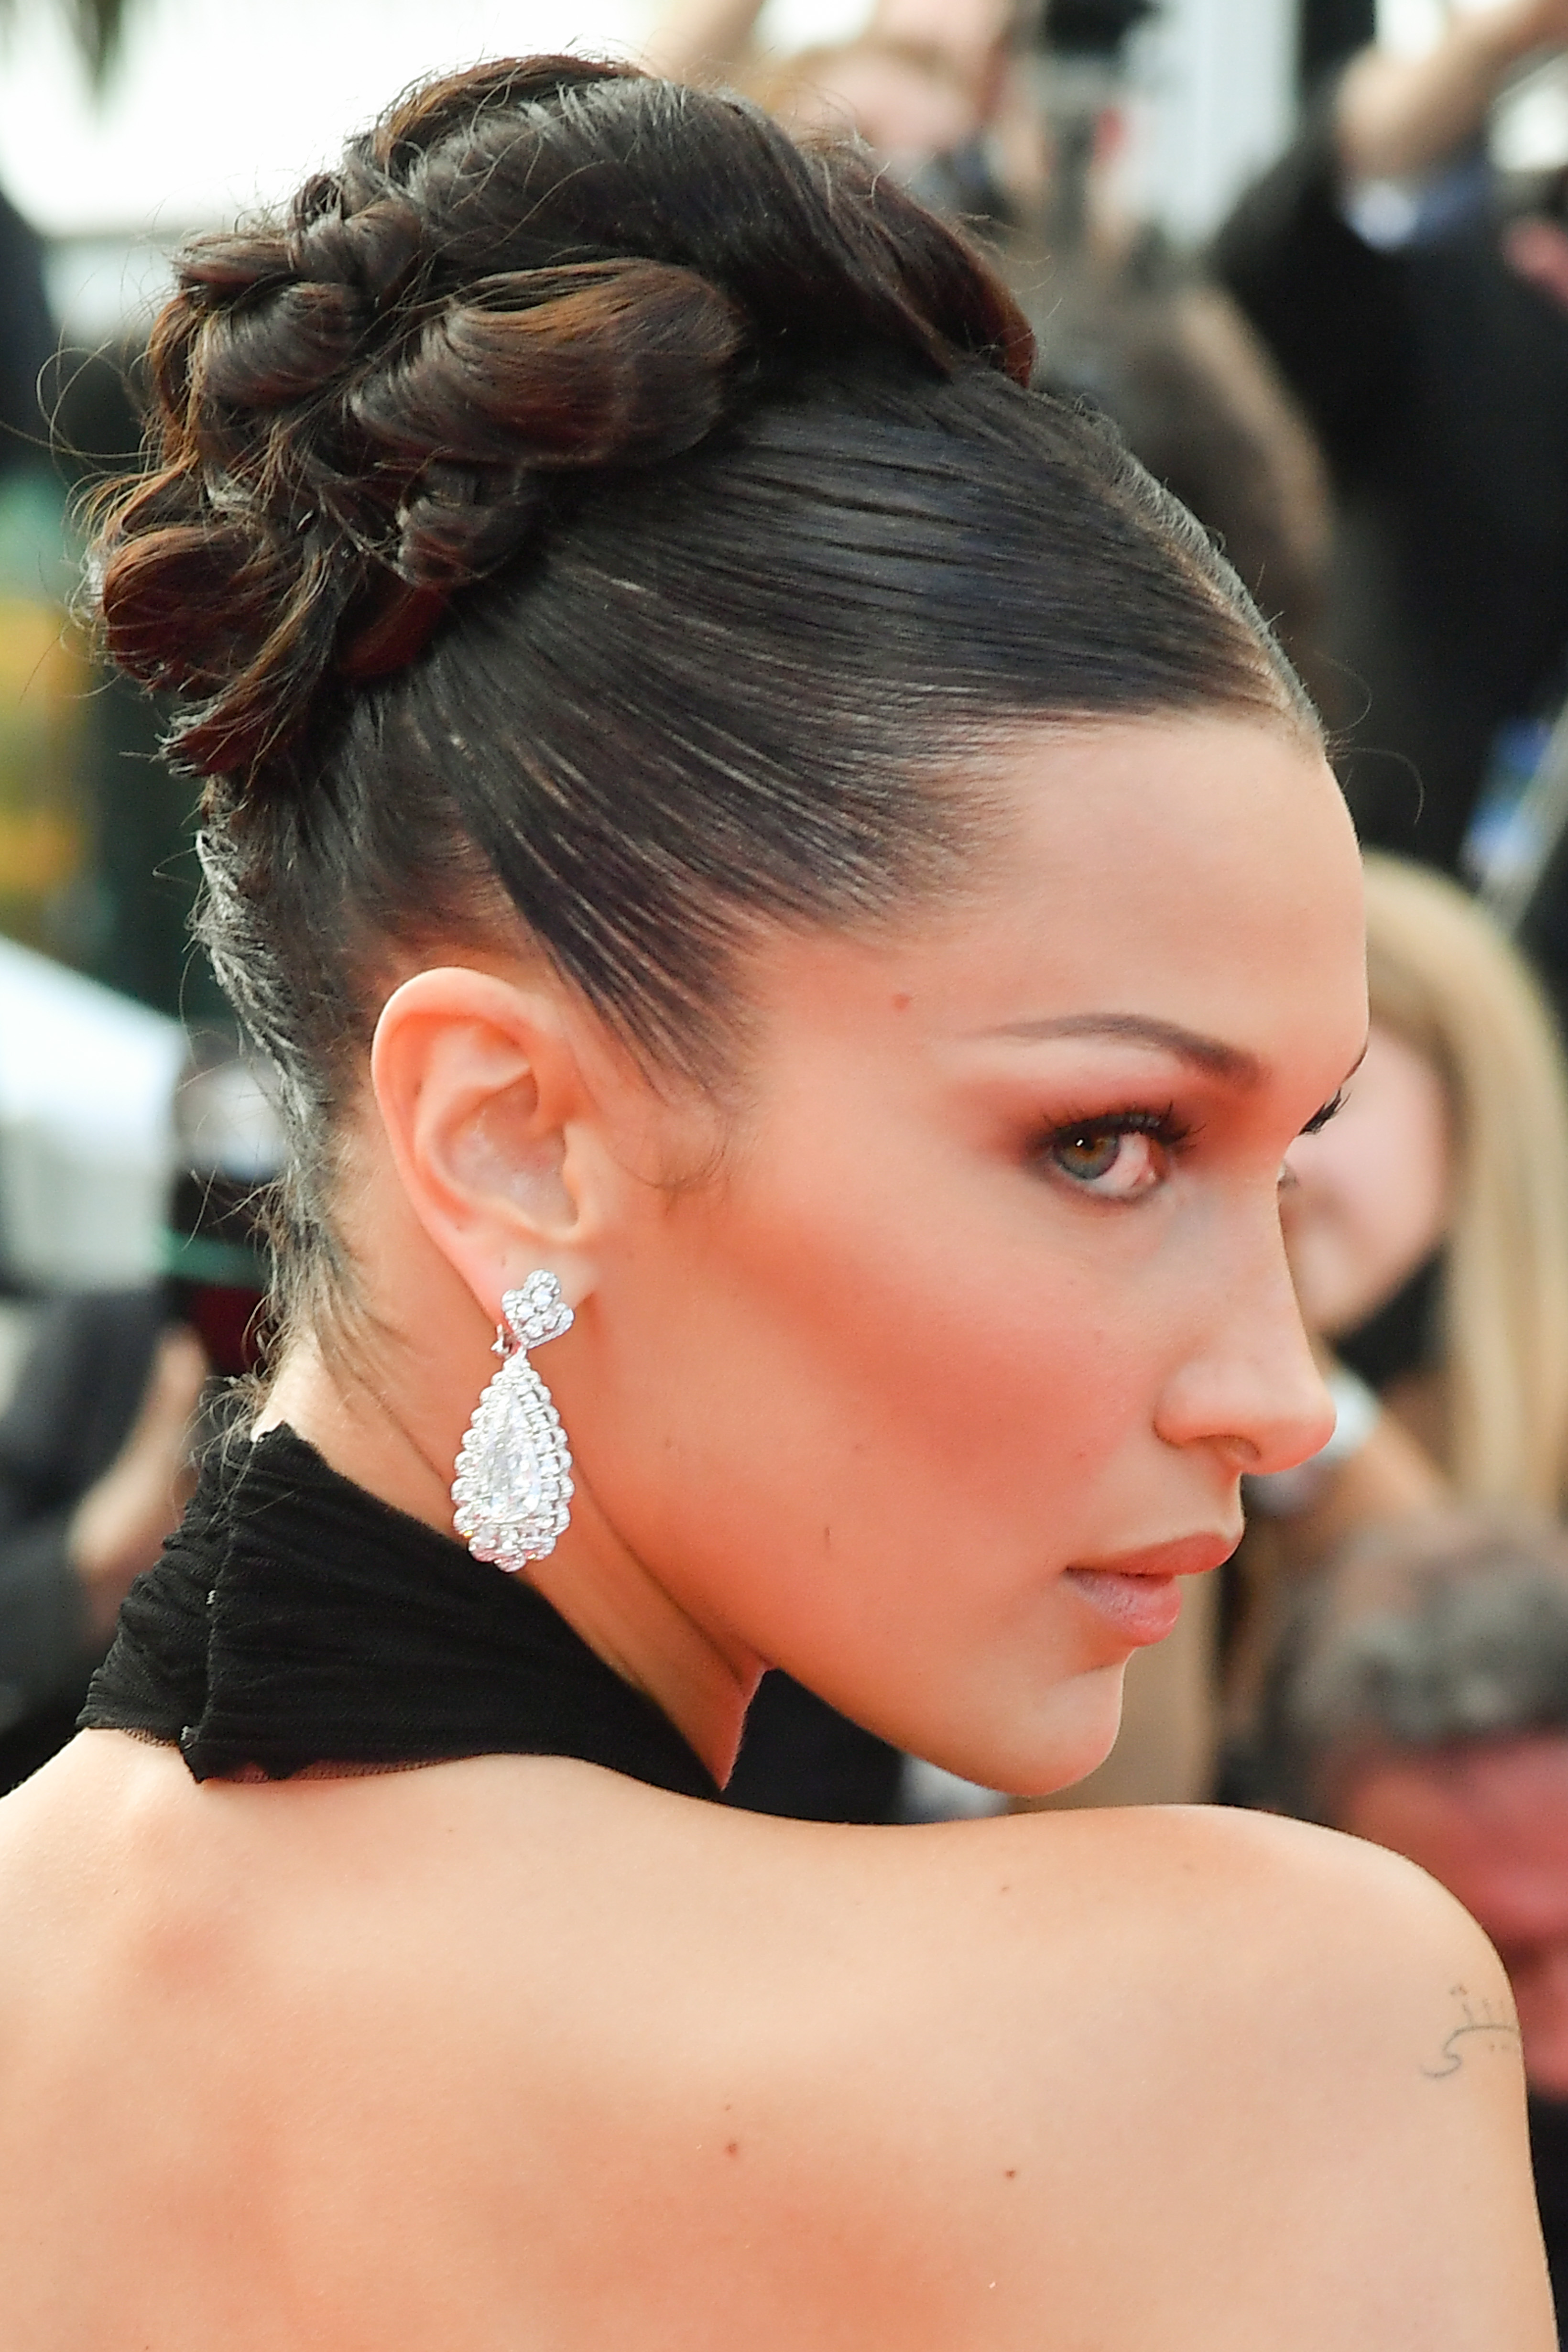 Bella Hadid's Cannes Hairstyles Are A Sight To Behold